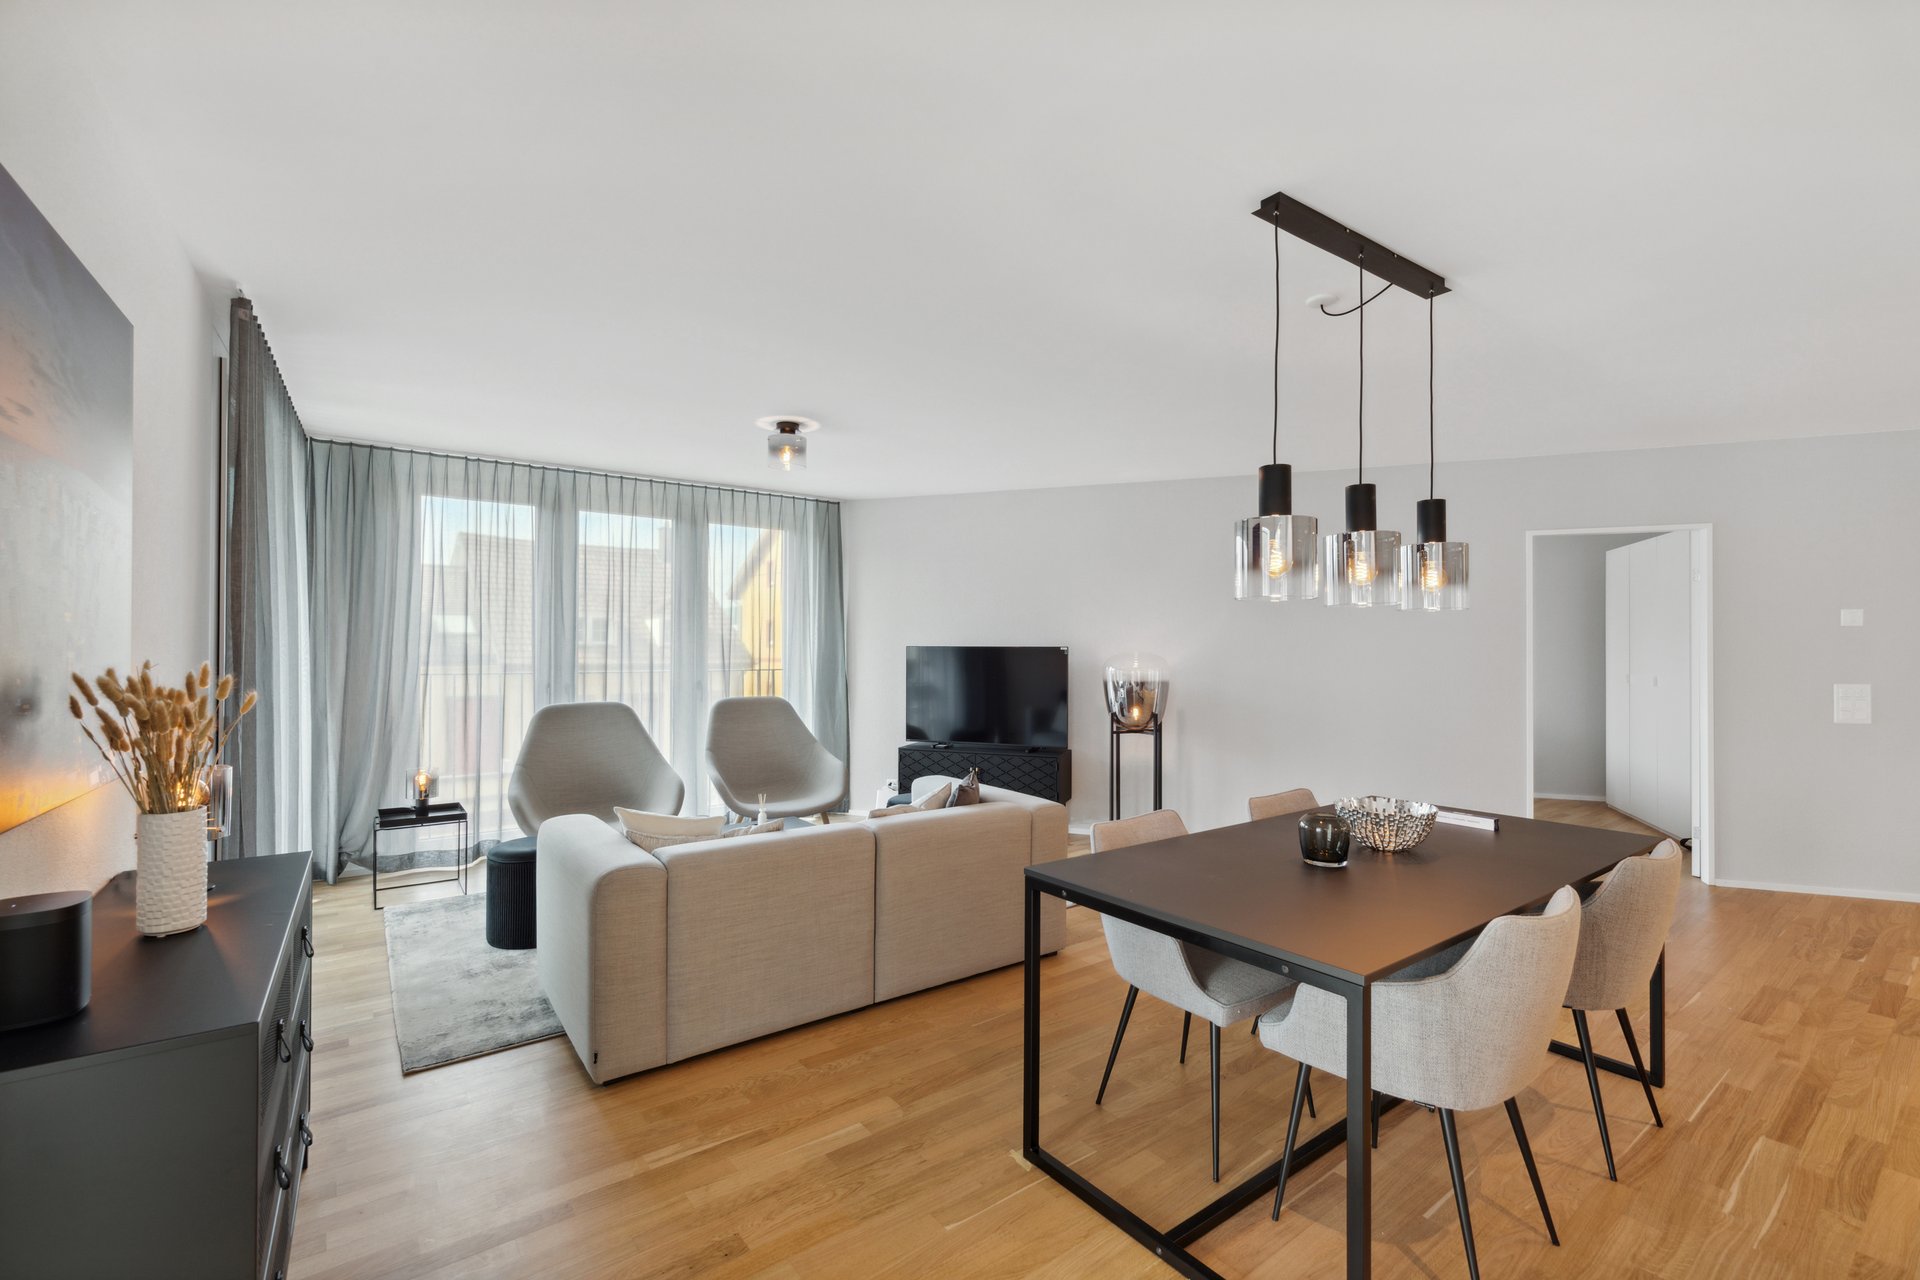 Discover stylish and comfortable furnished apartments in Basel. Our apartments offer high-quality furniture and top-notch amenities for your optimal living comfort. Enjoy luxurious living in one of Switzerland's most beautiful cities. Find your perfect ac